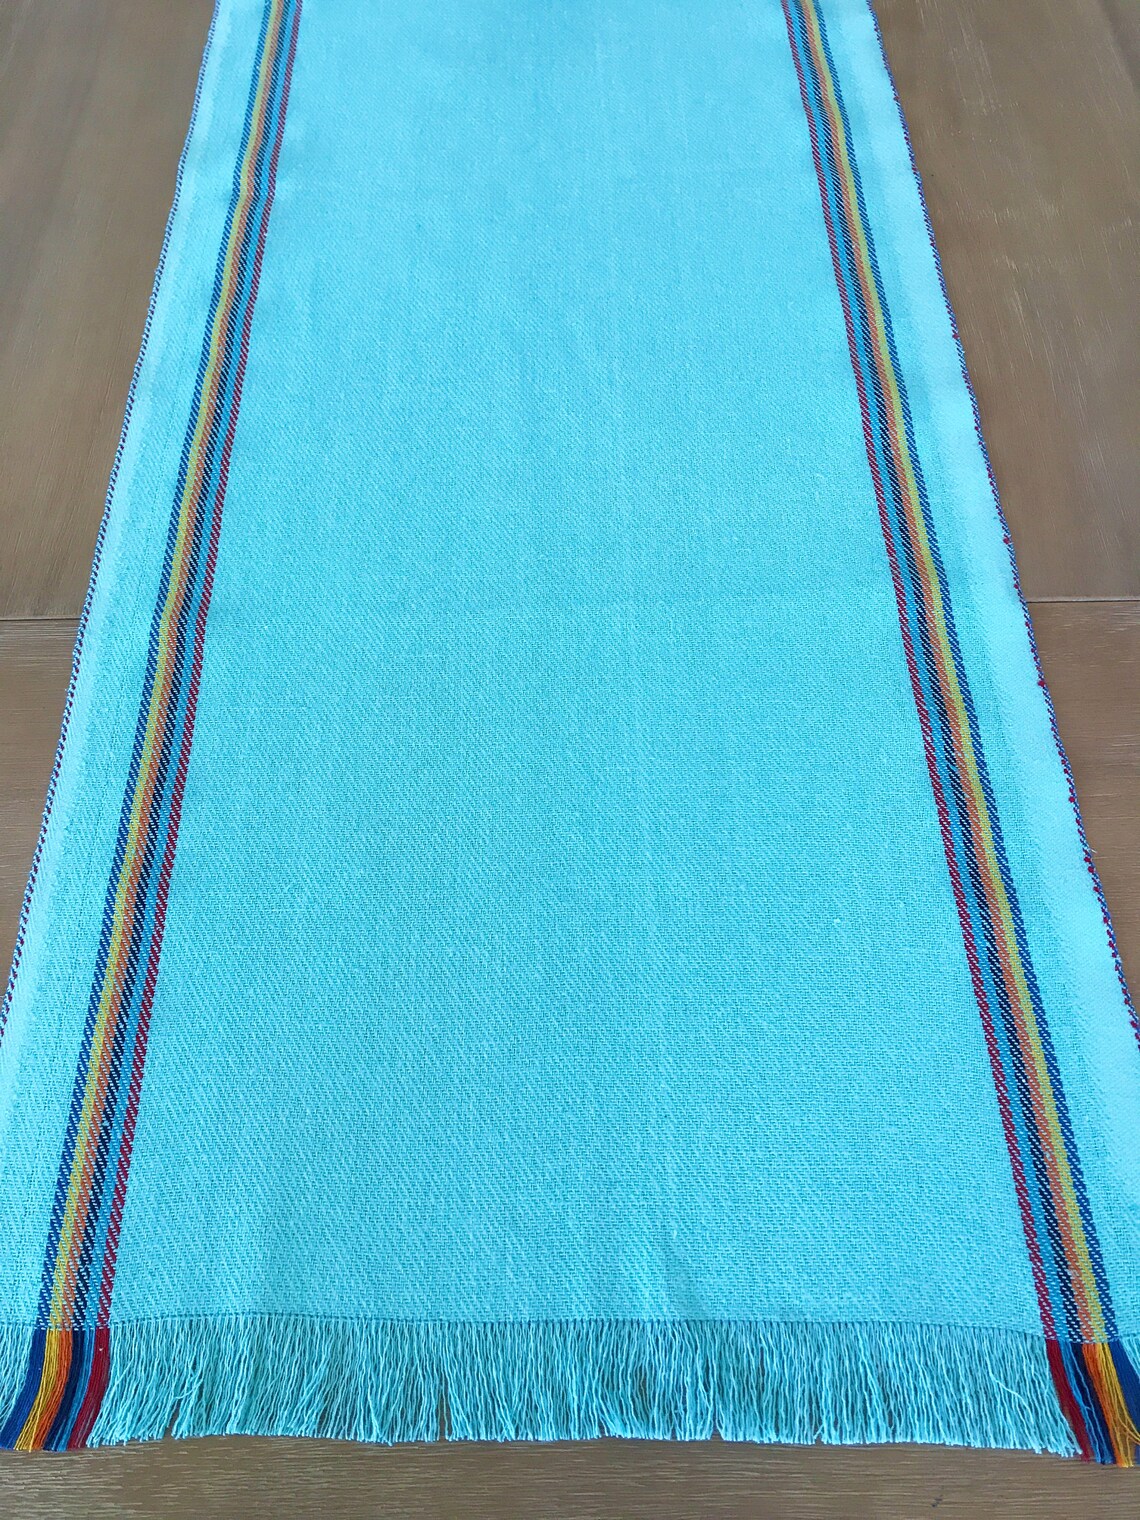 Mexican Party Supplies Turquoise Fabric Table Runner Llama - Etsy